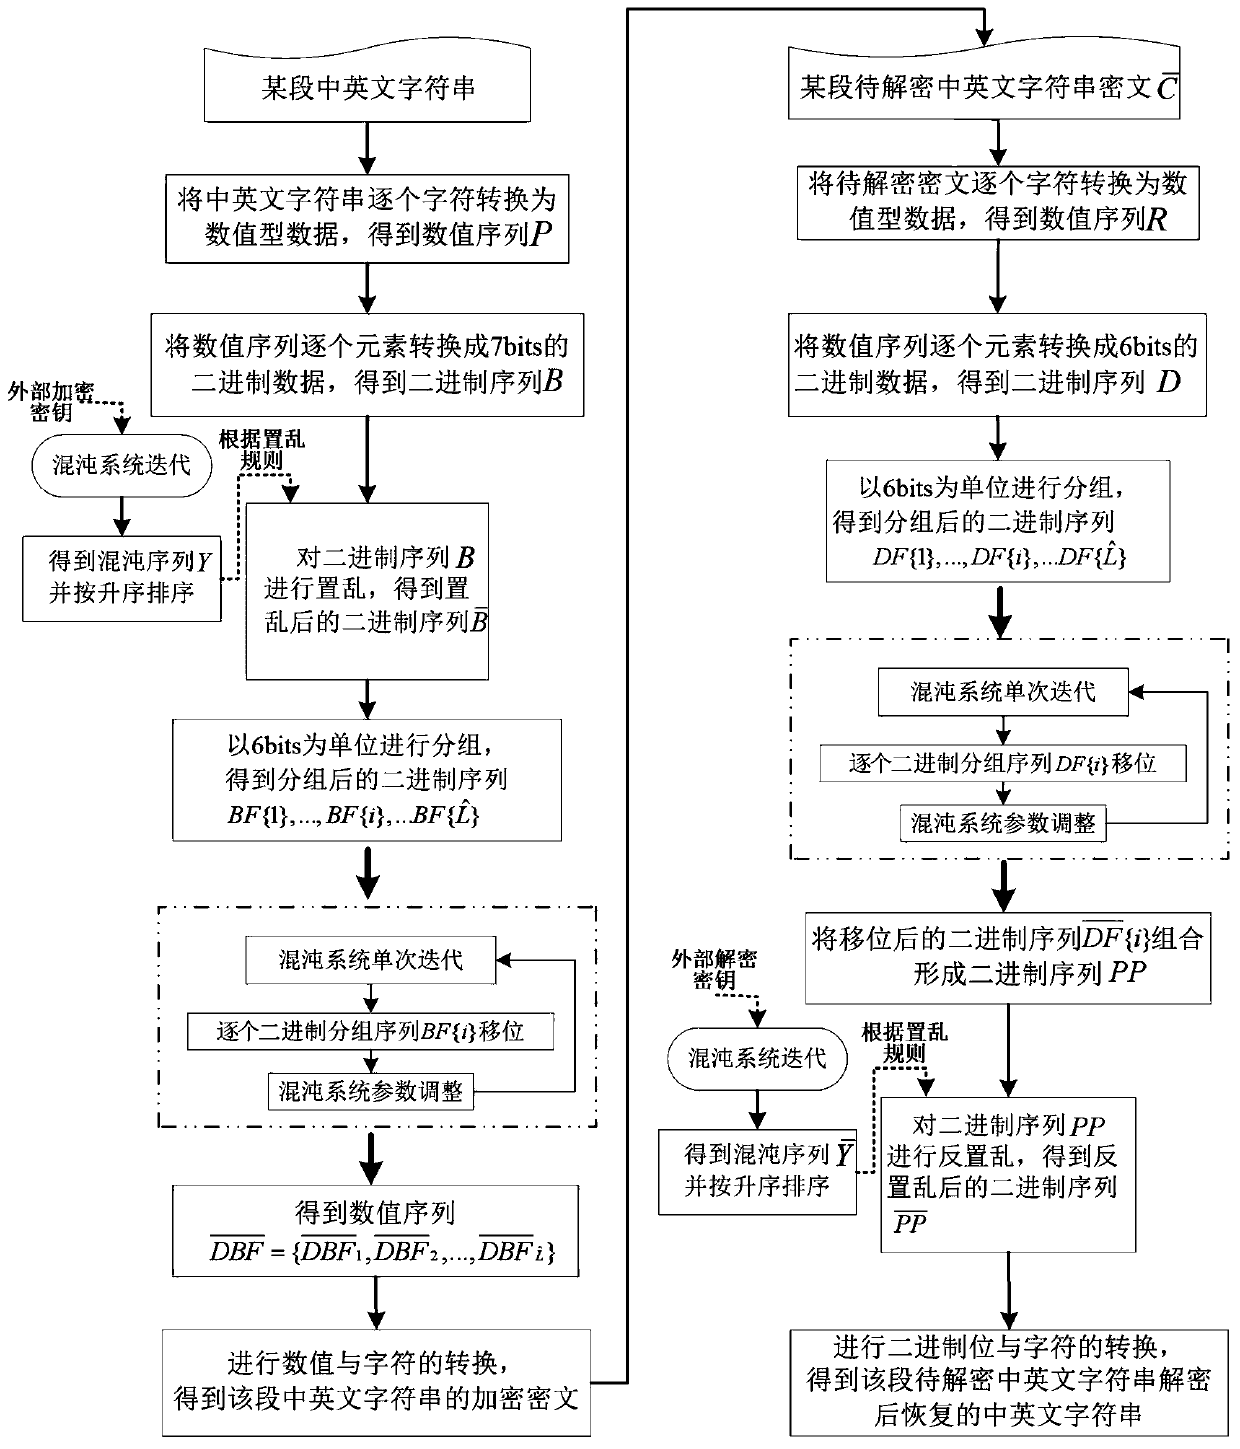 Encryption and decryption method for Chinese and English character strings